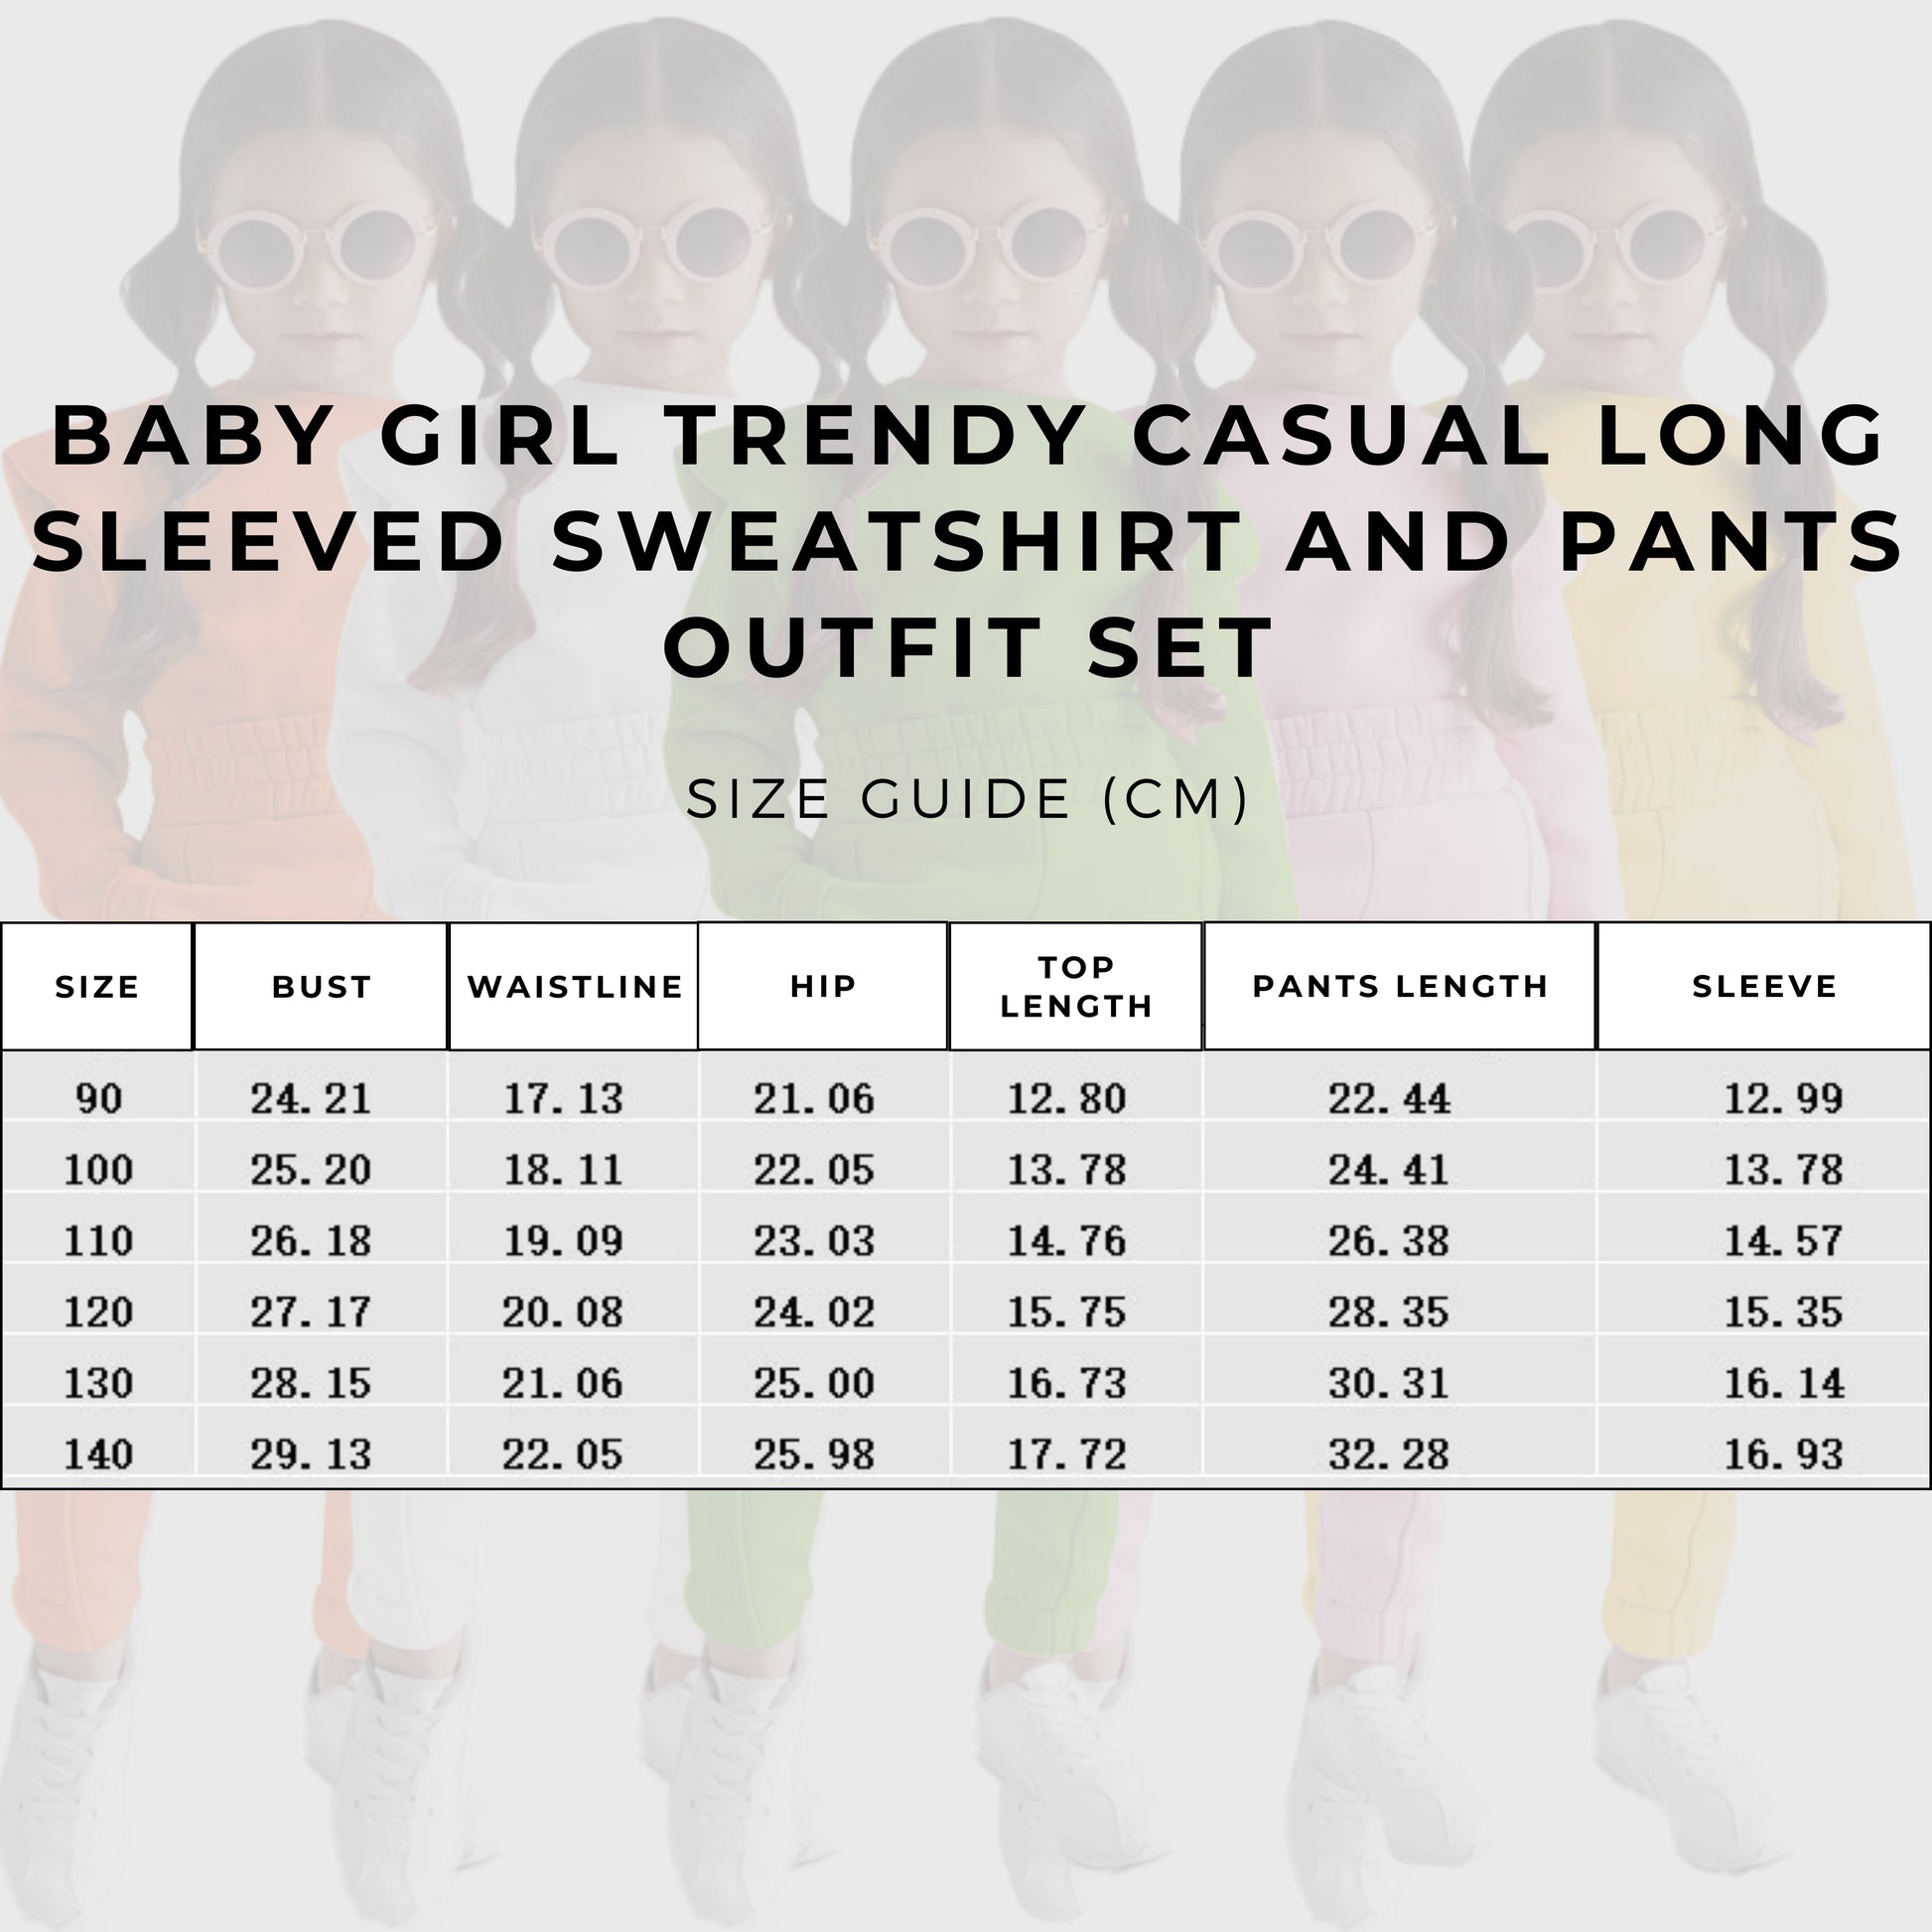 Baby Girl Trendy Casual Long Sleeved Sweatshirt and Pants Outfit Set size